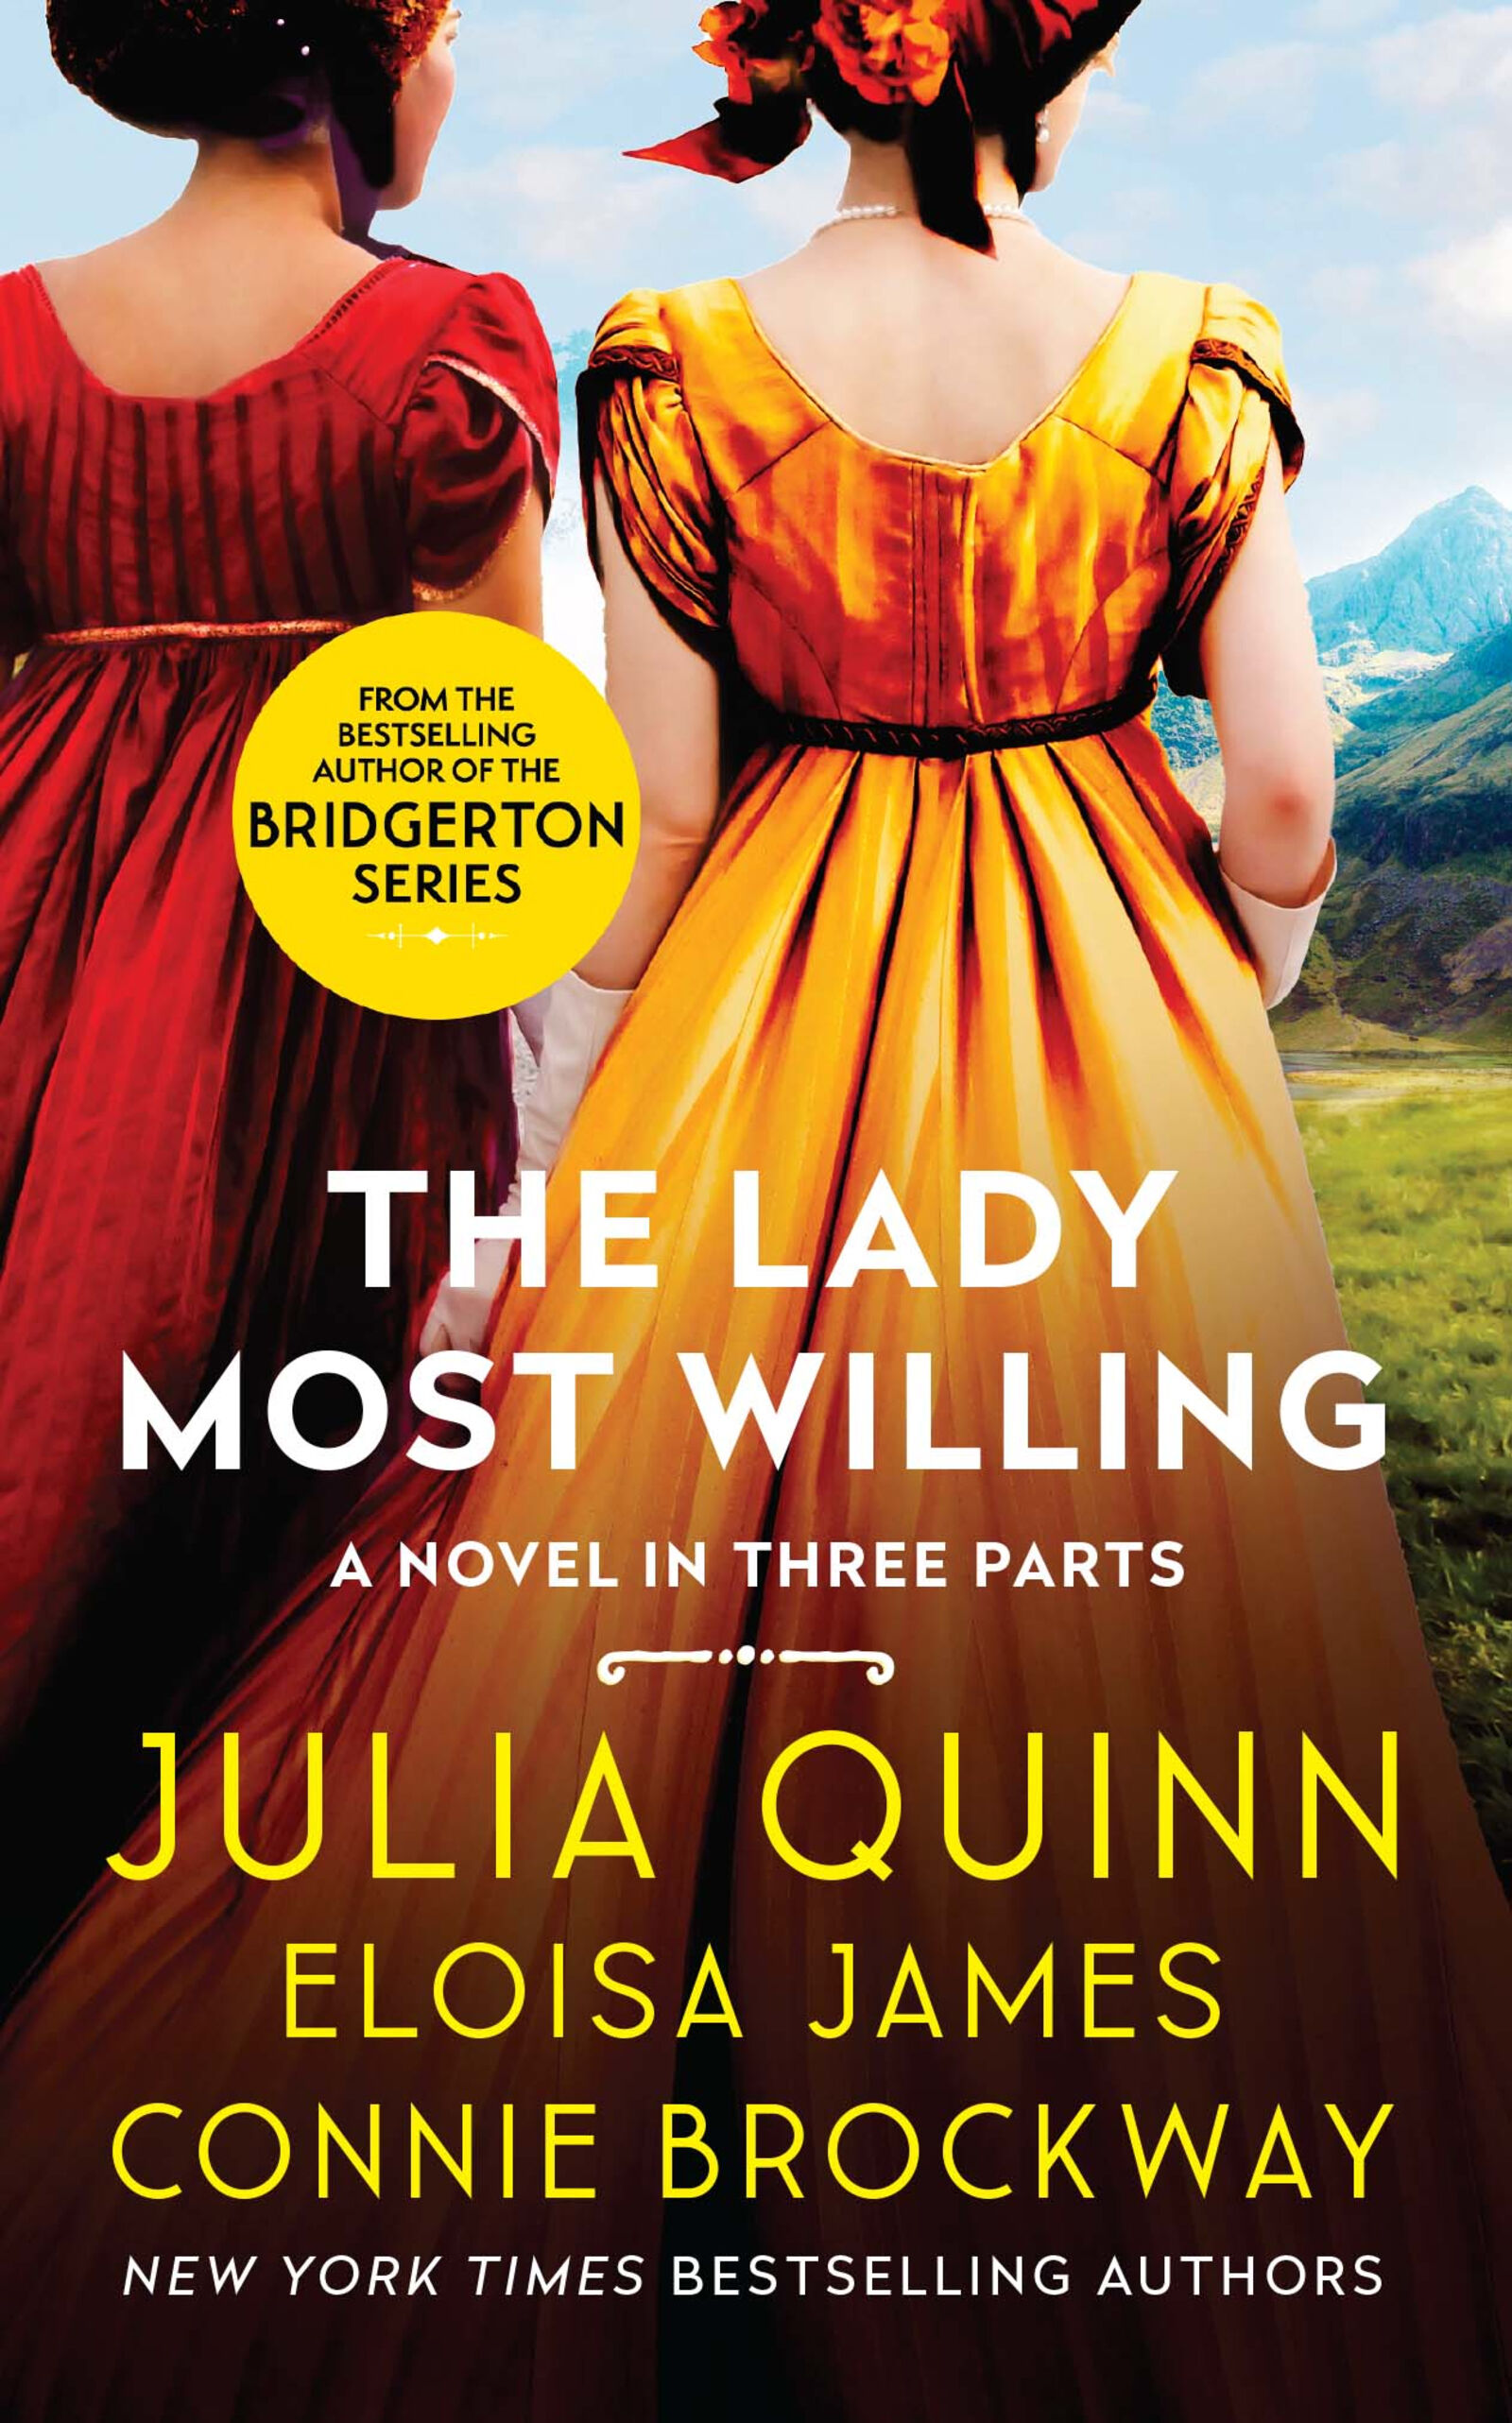 The Lady Most Willing... by Julia Quinn